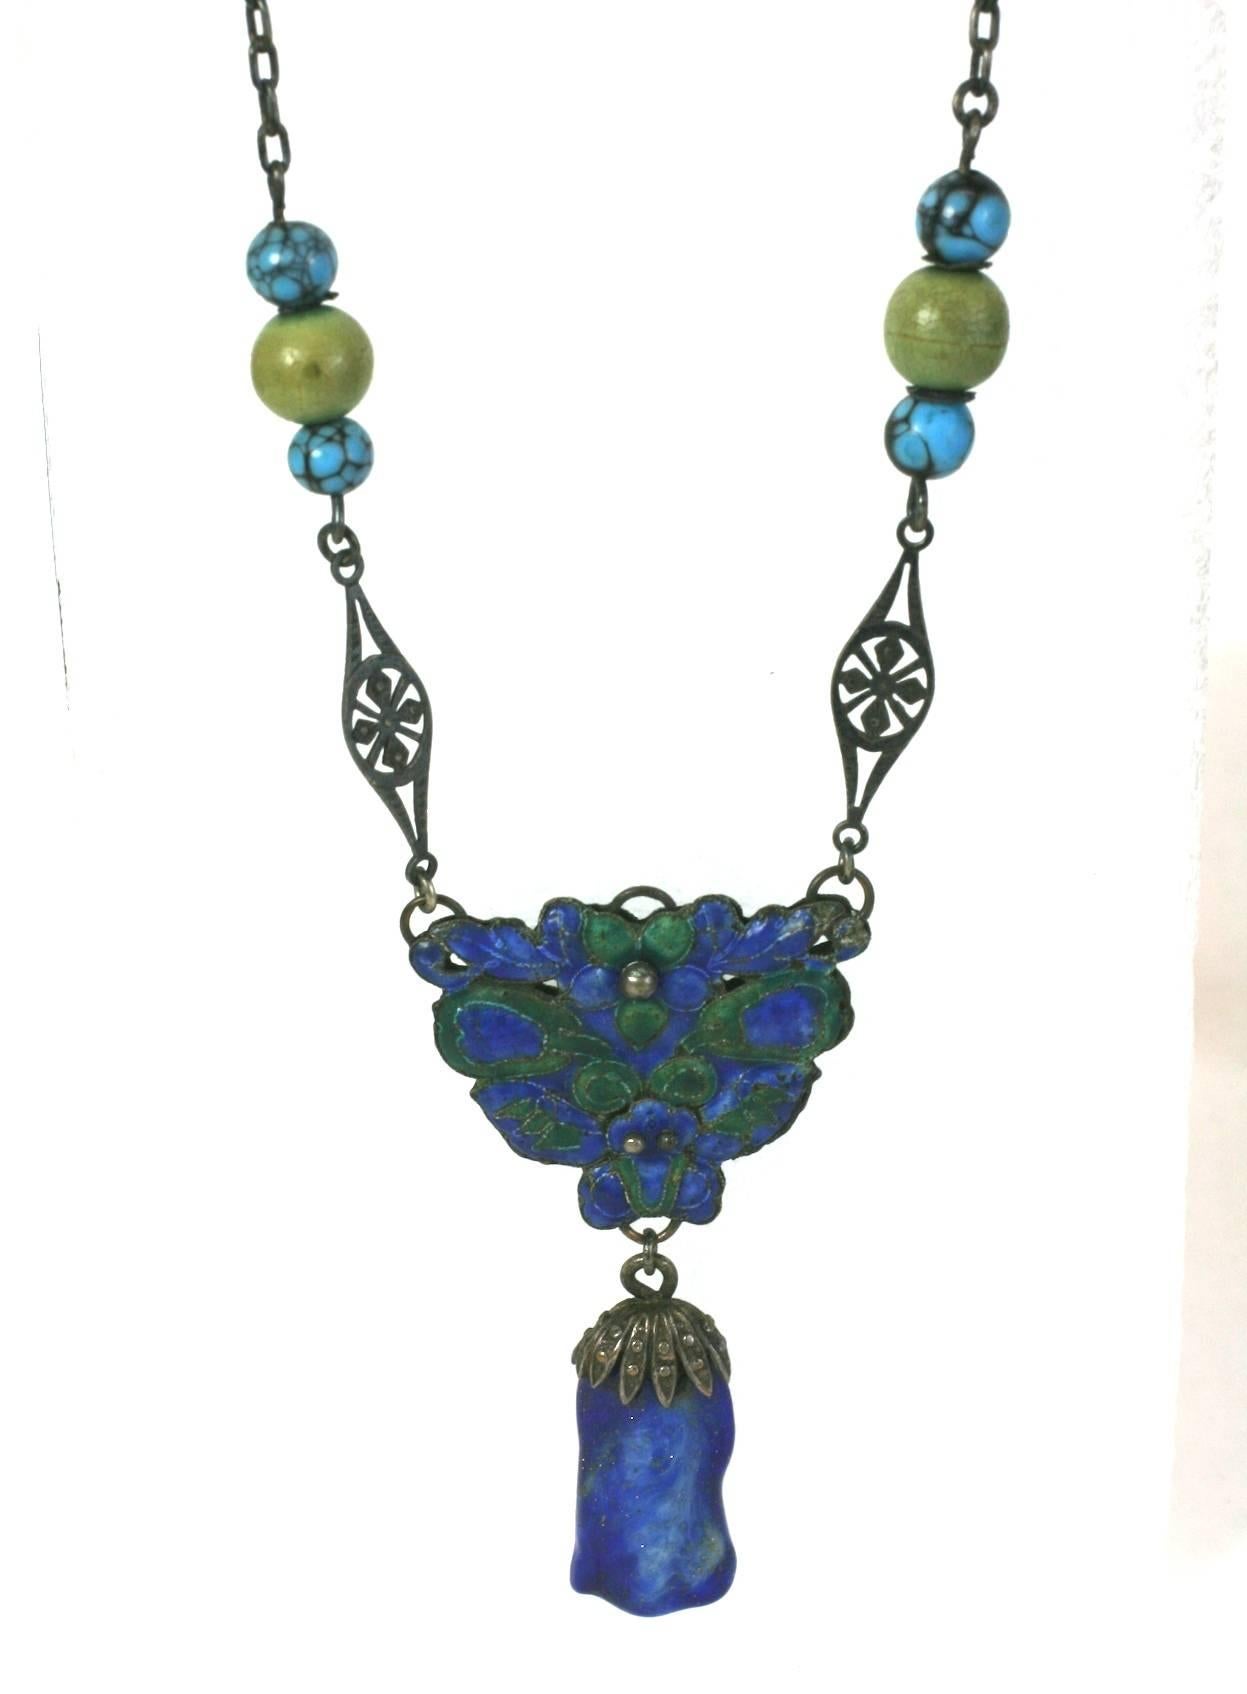 Antique Chinese Enamel and Lapis Glass Necklace of silver circa 1900's.  Central motif enameled in green and blue with lapis pate de verre drop. Faux turquoise and hardstone beads on chain. 
Small size 14